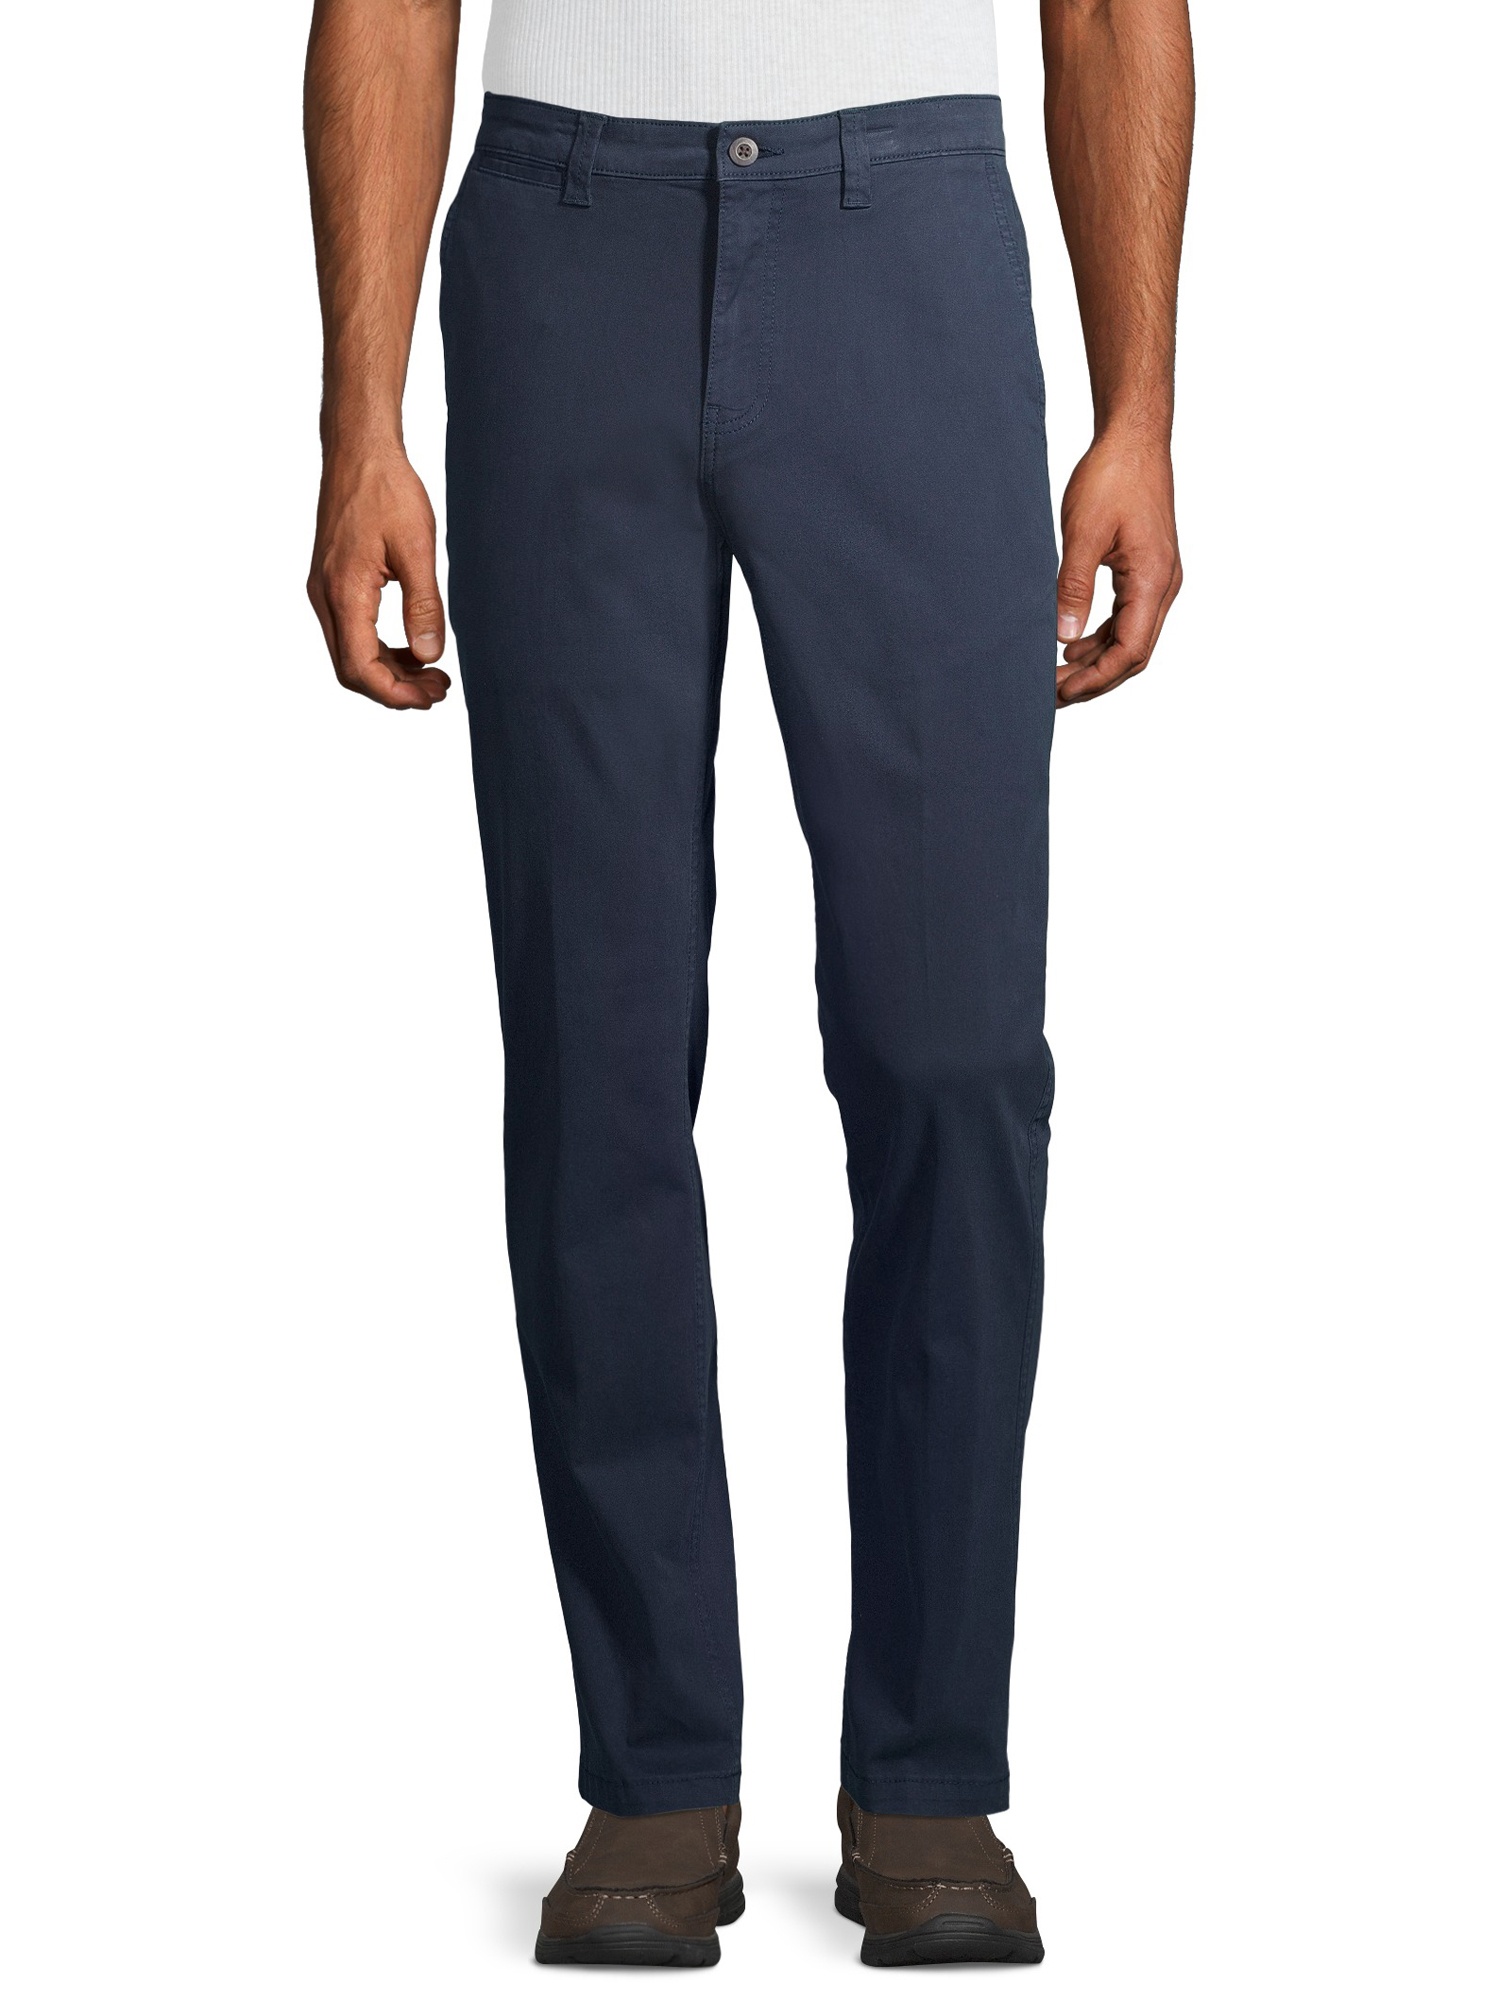 Shop George Men's Athletic Fit Chino Pants - Great Prices Await ...